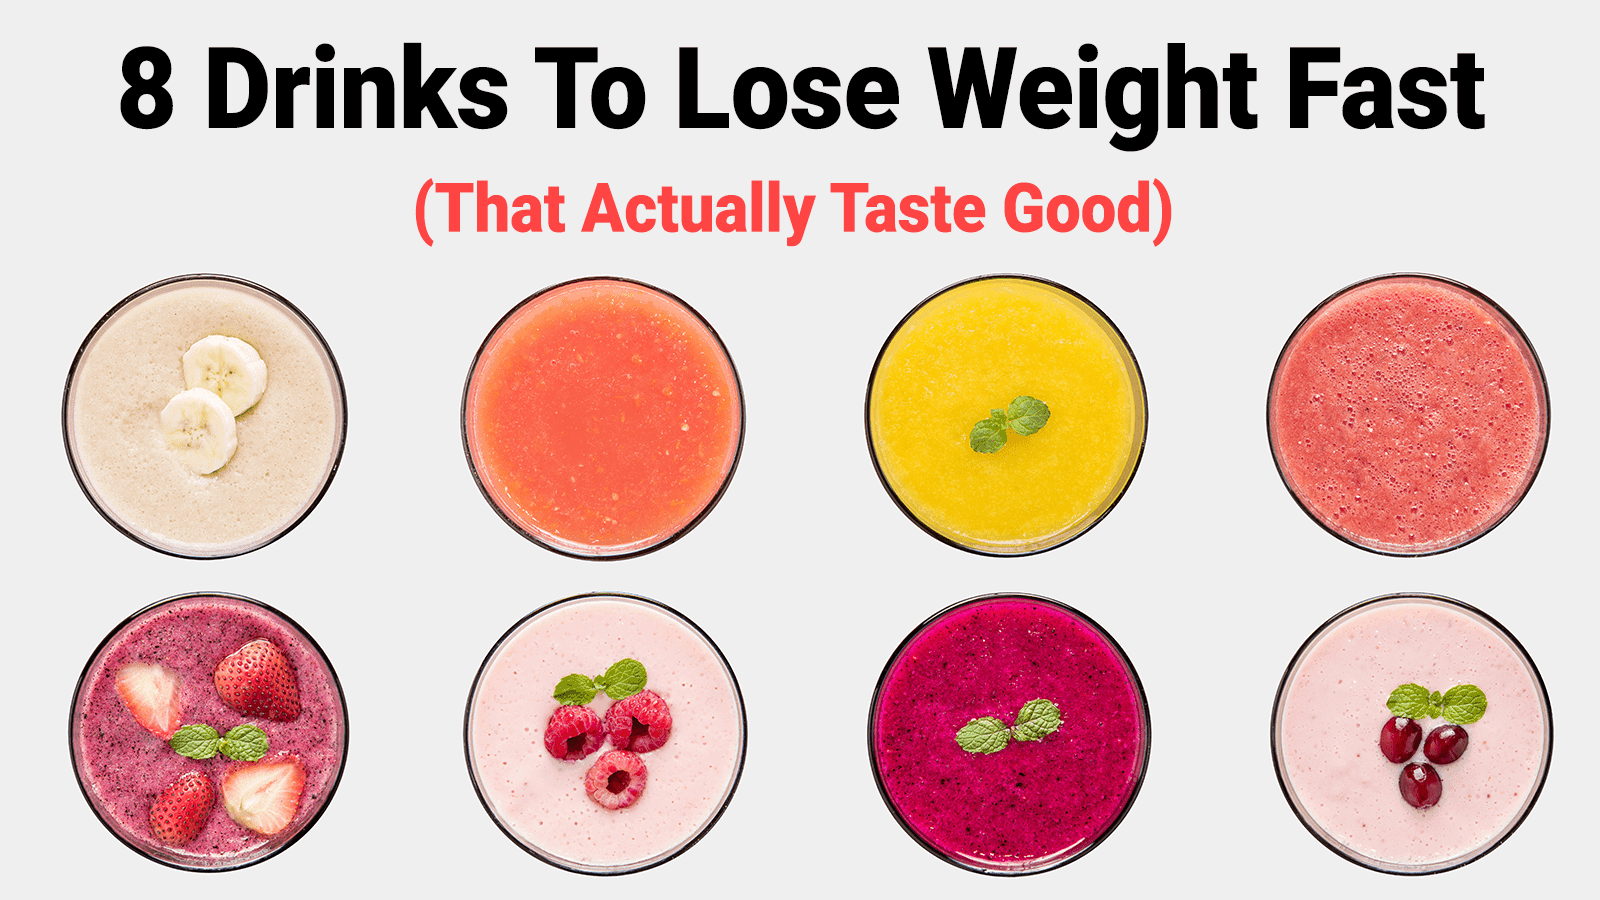 8 Drinks To Lose Weight Fast (That Actually Taste Good)